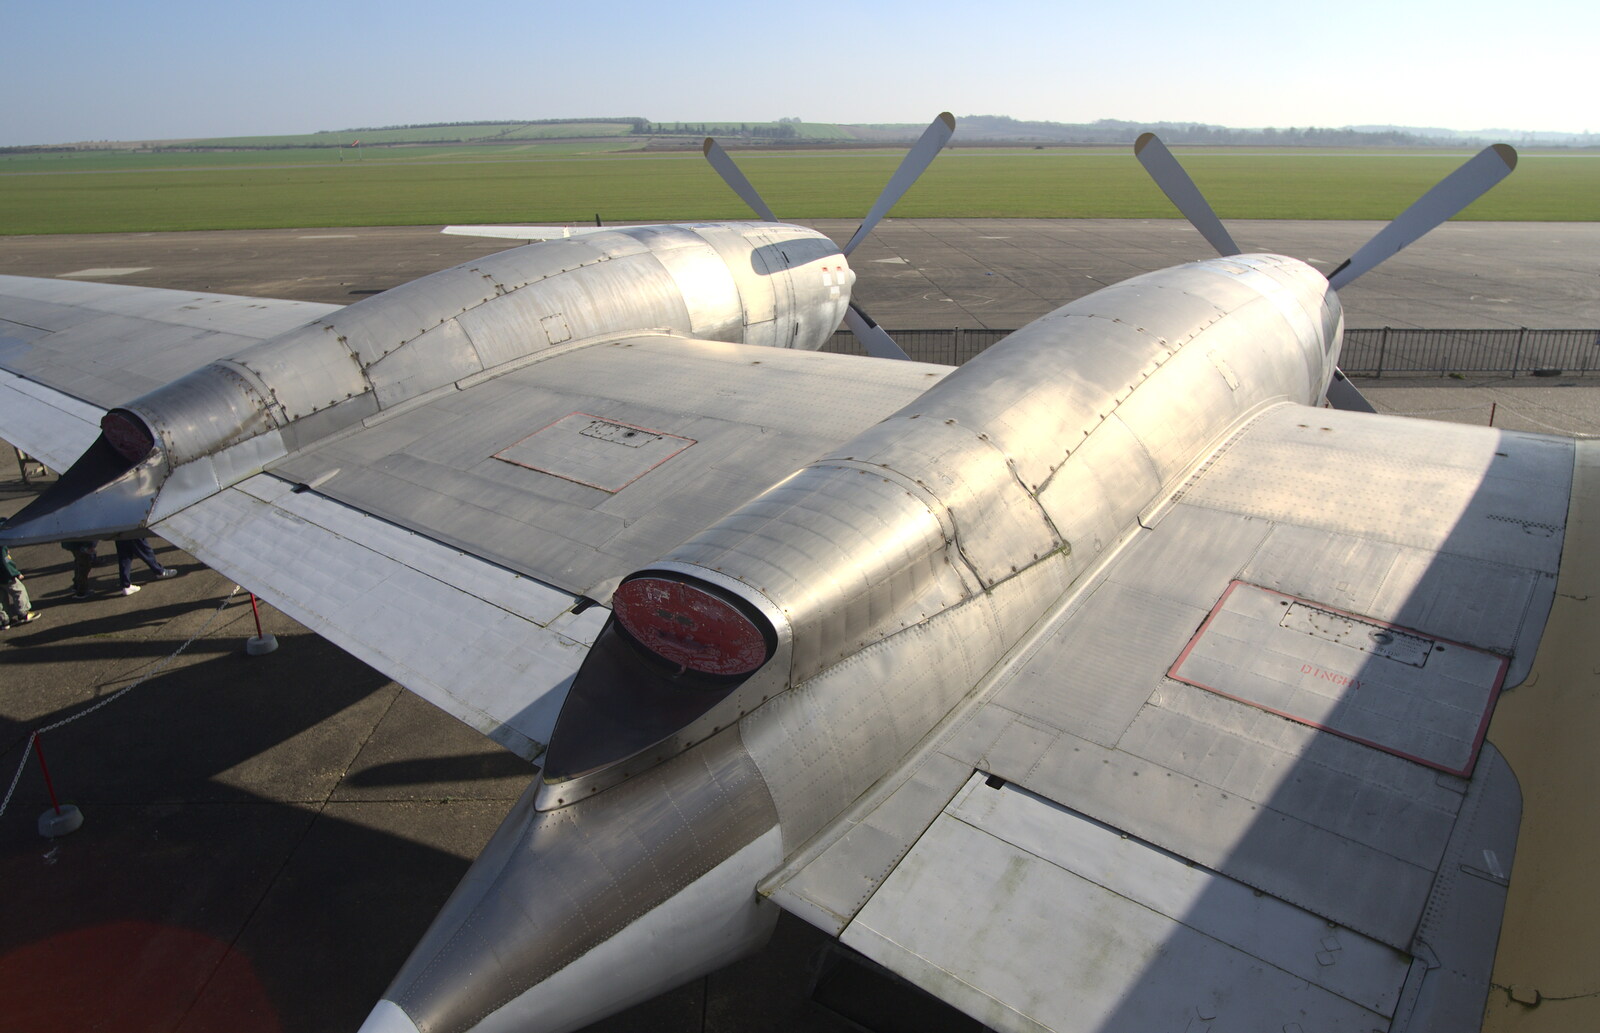 A Bristol Britannia's wings from A Day Out at Duxford, Cambridgeshire - 9th March 2014